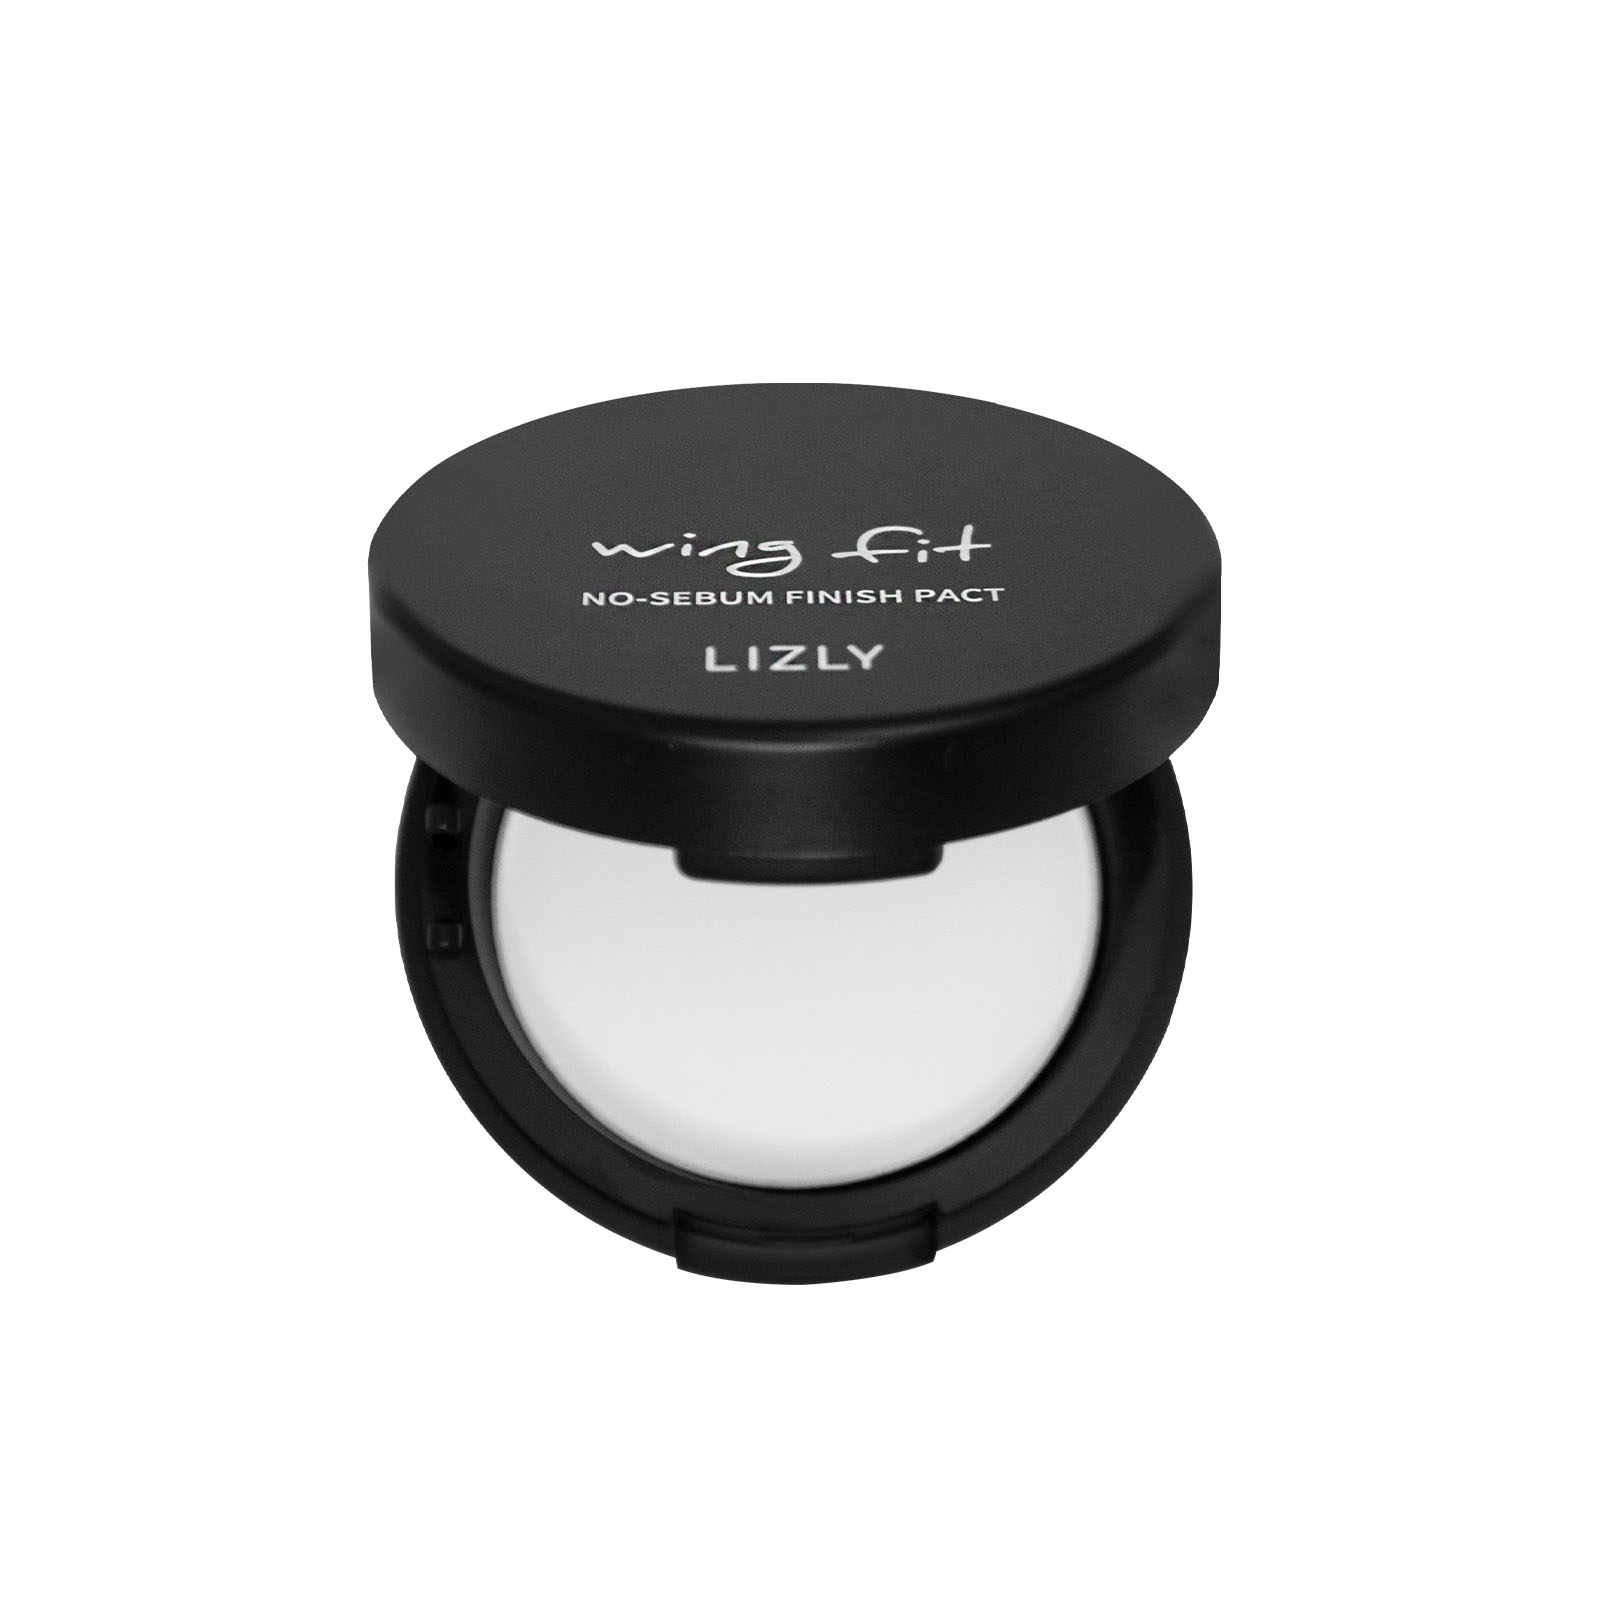 LIZLY WING FIT NO-SEBUM FINISH PACT